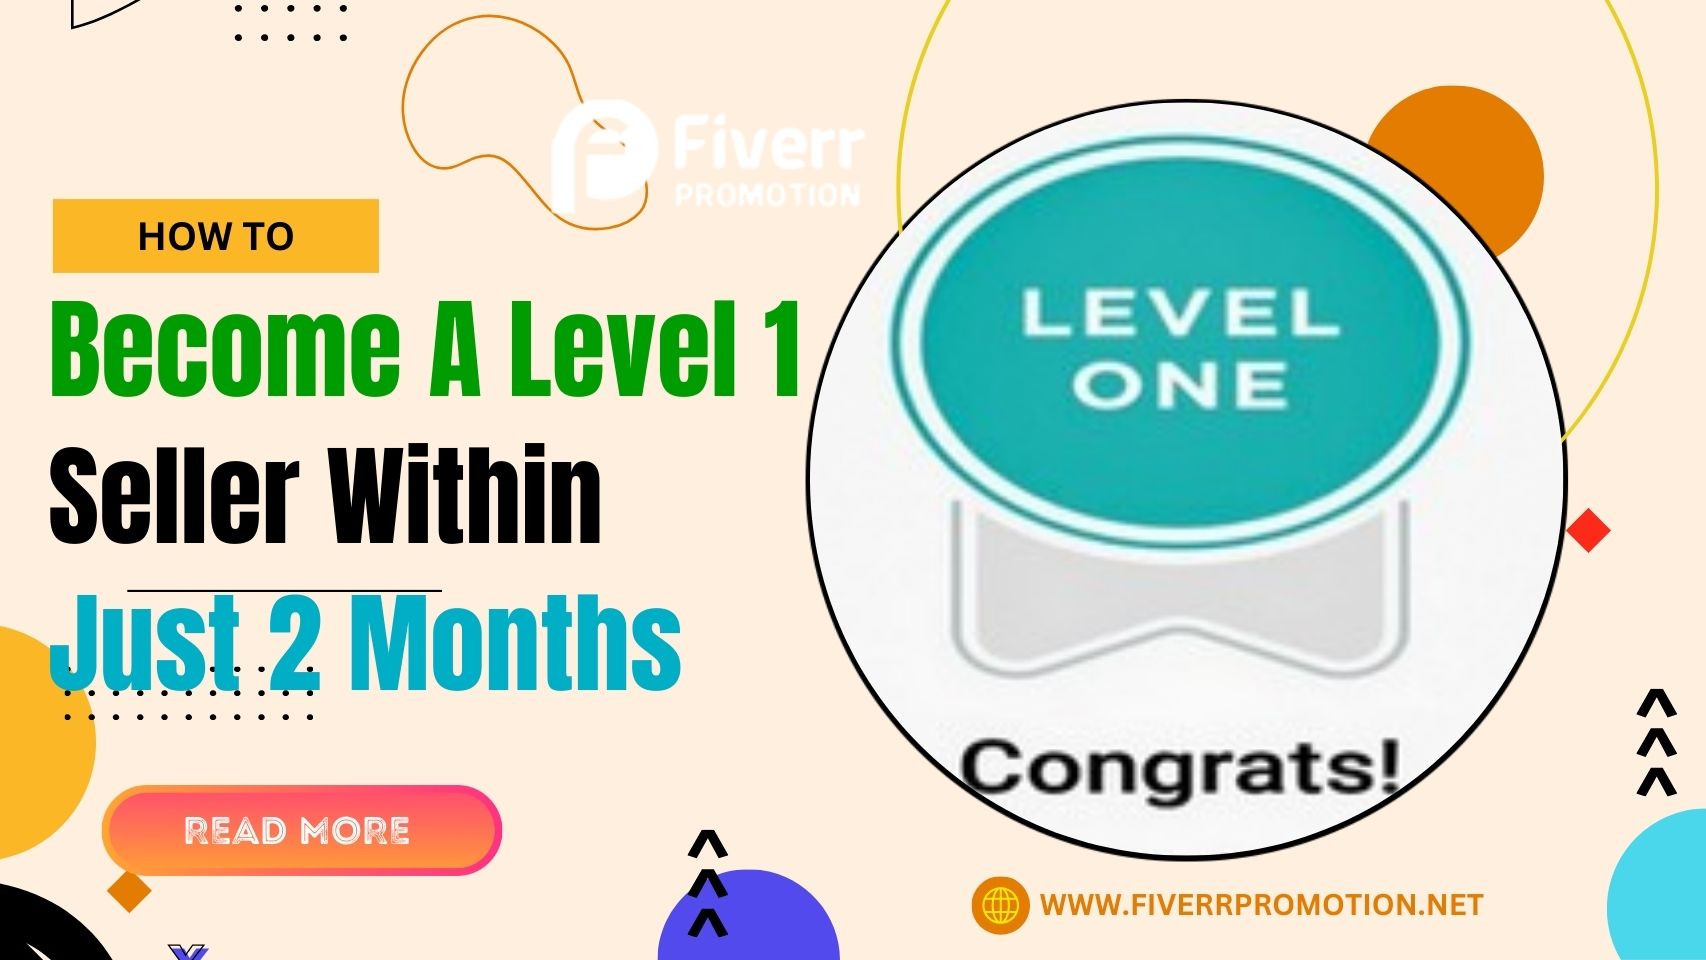 How to Become a Level 1 Seller Within Just 2 Months